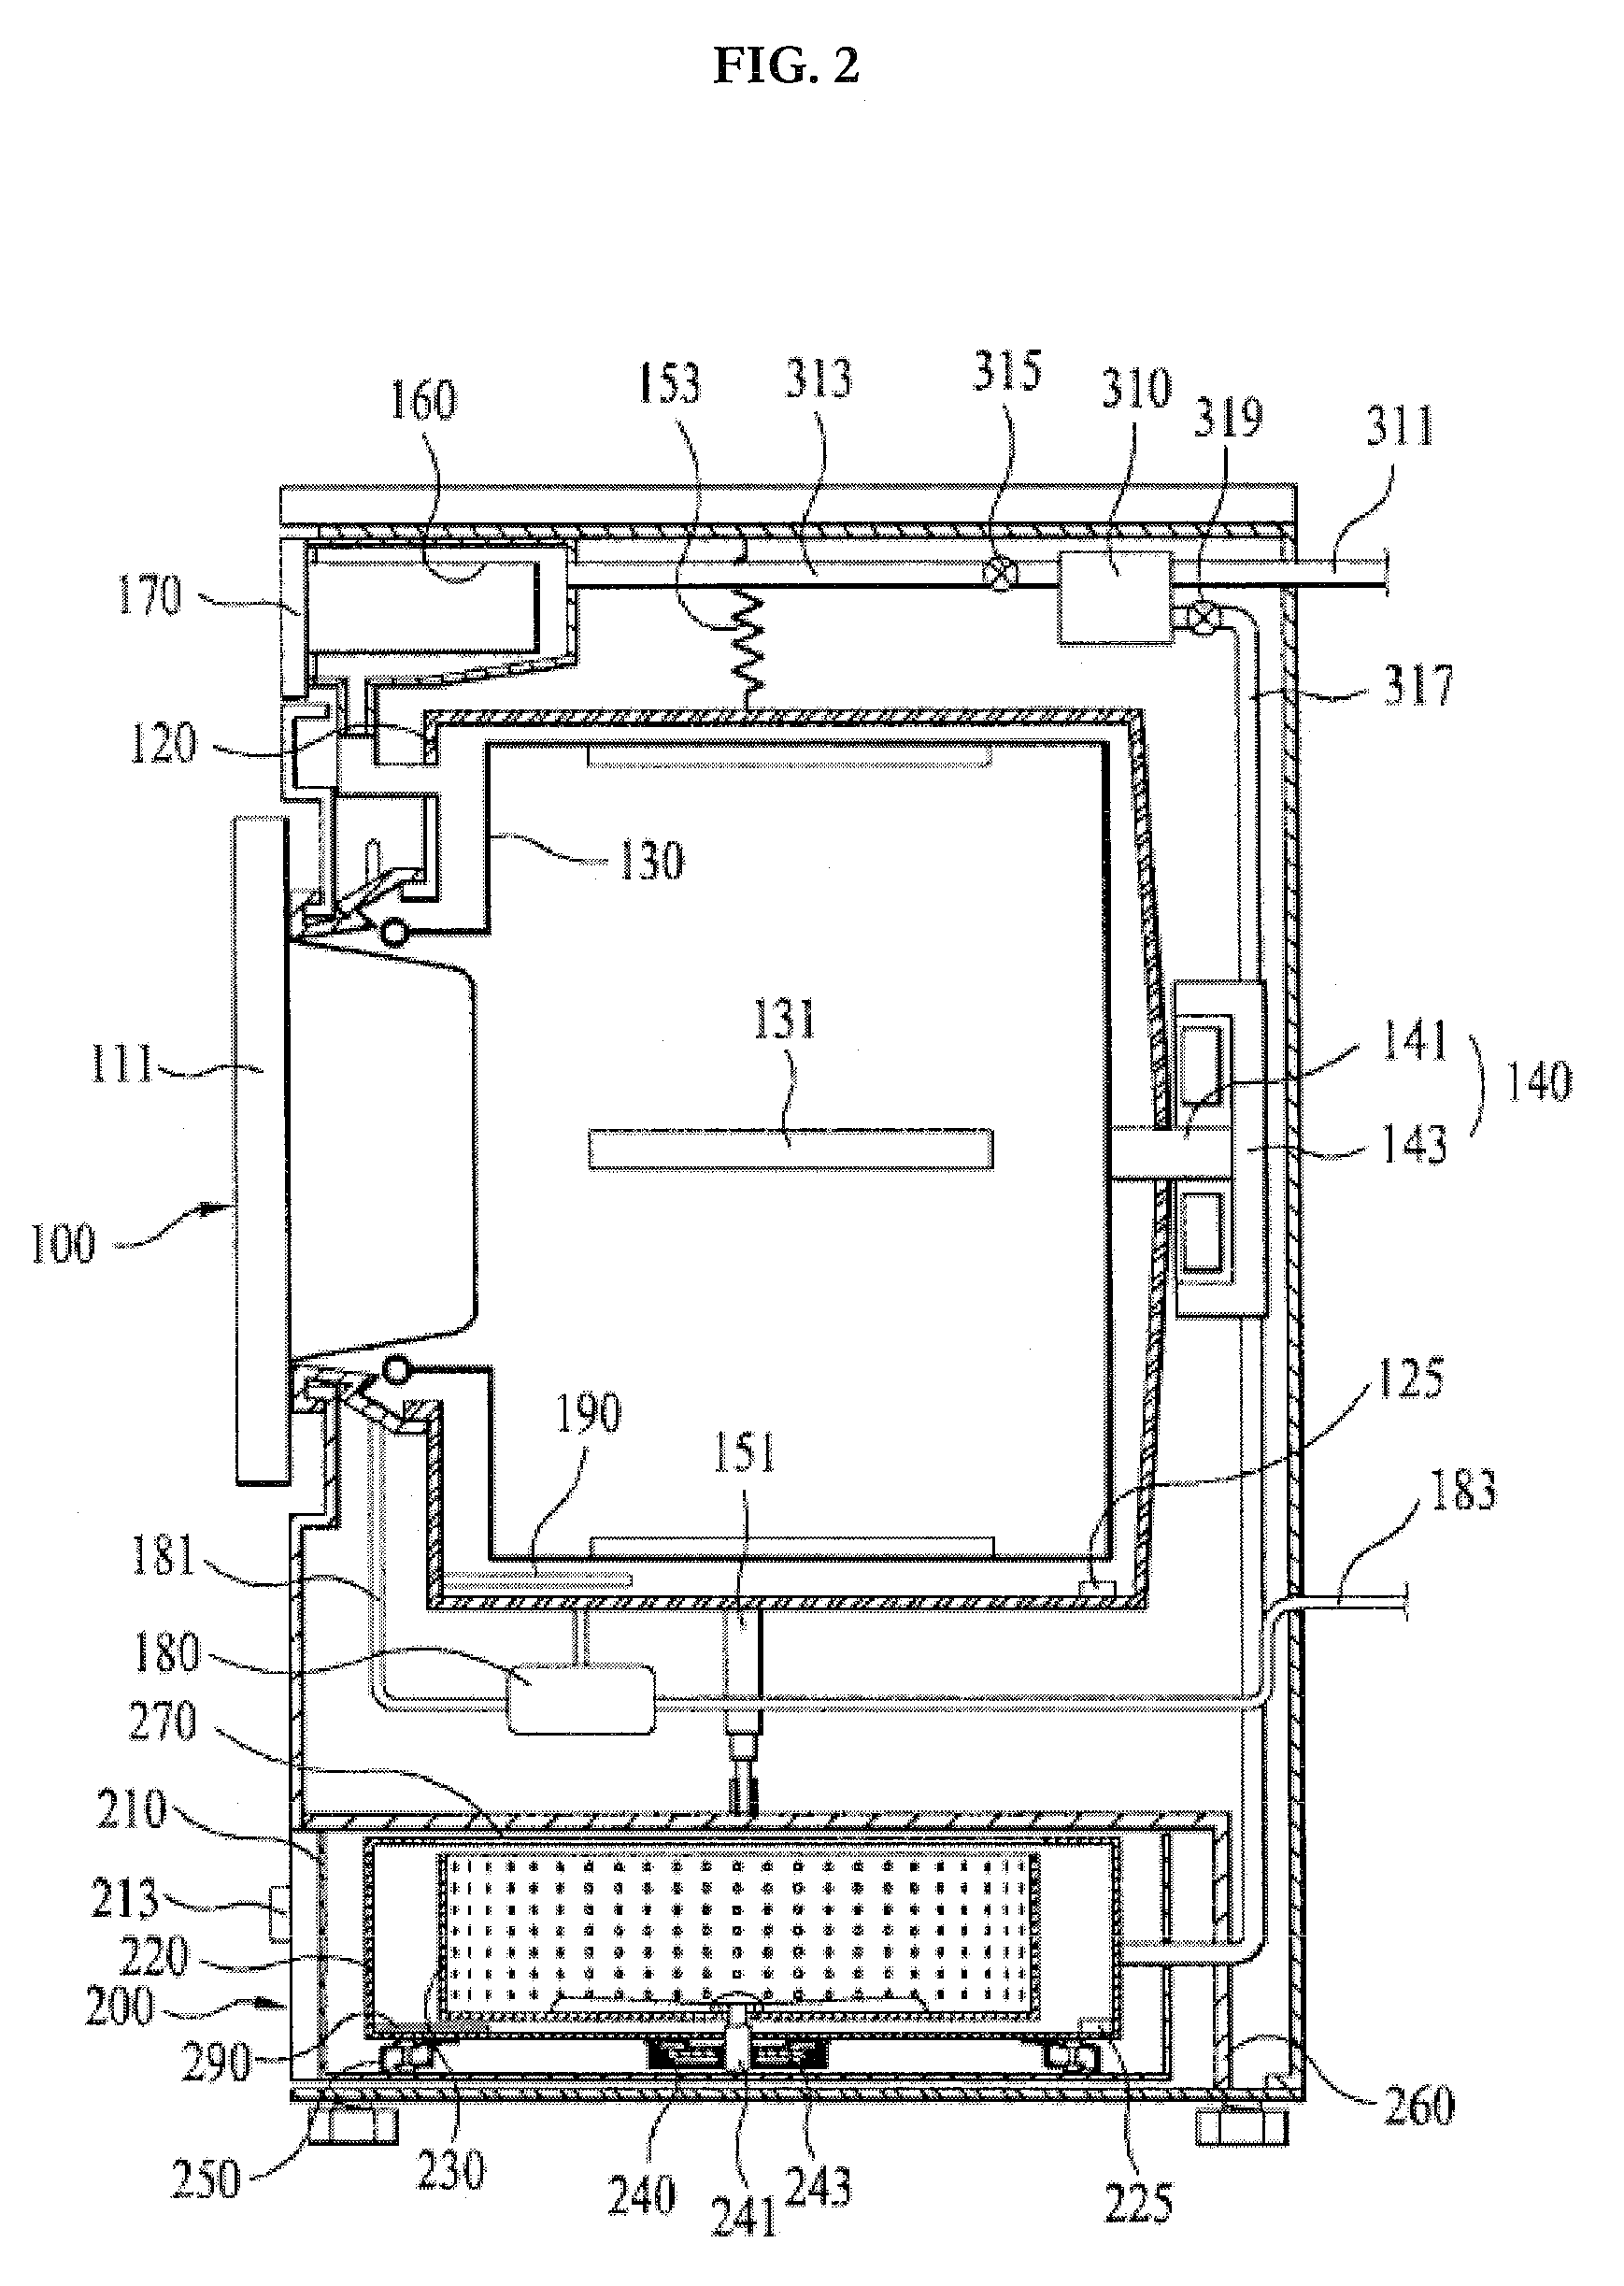 Laundry treating device and method of controlling the same